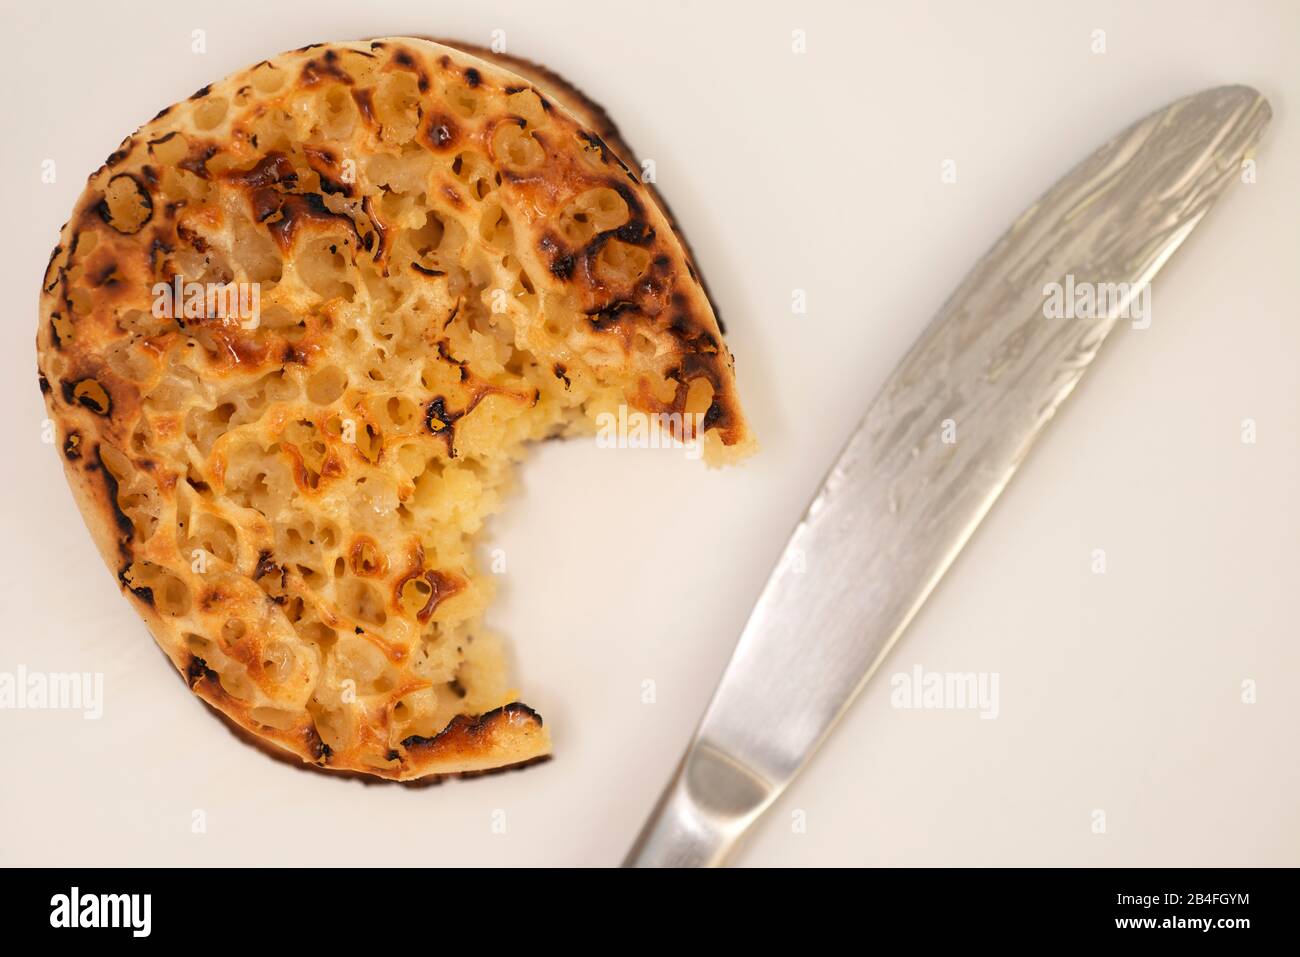 Buttered toasted crumpet Stock Photo